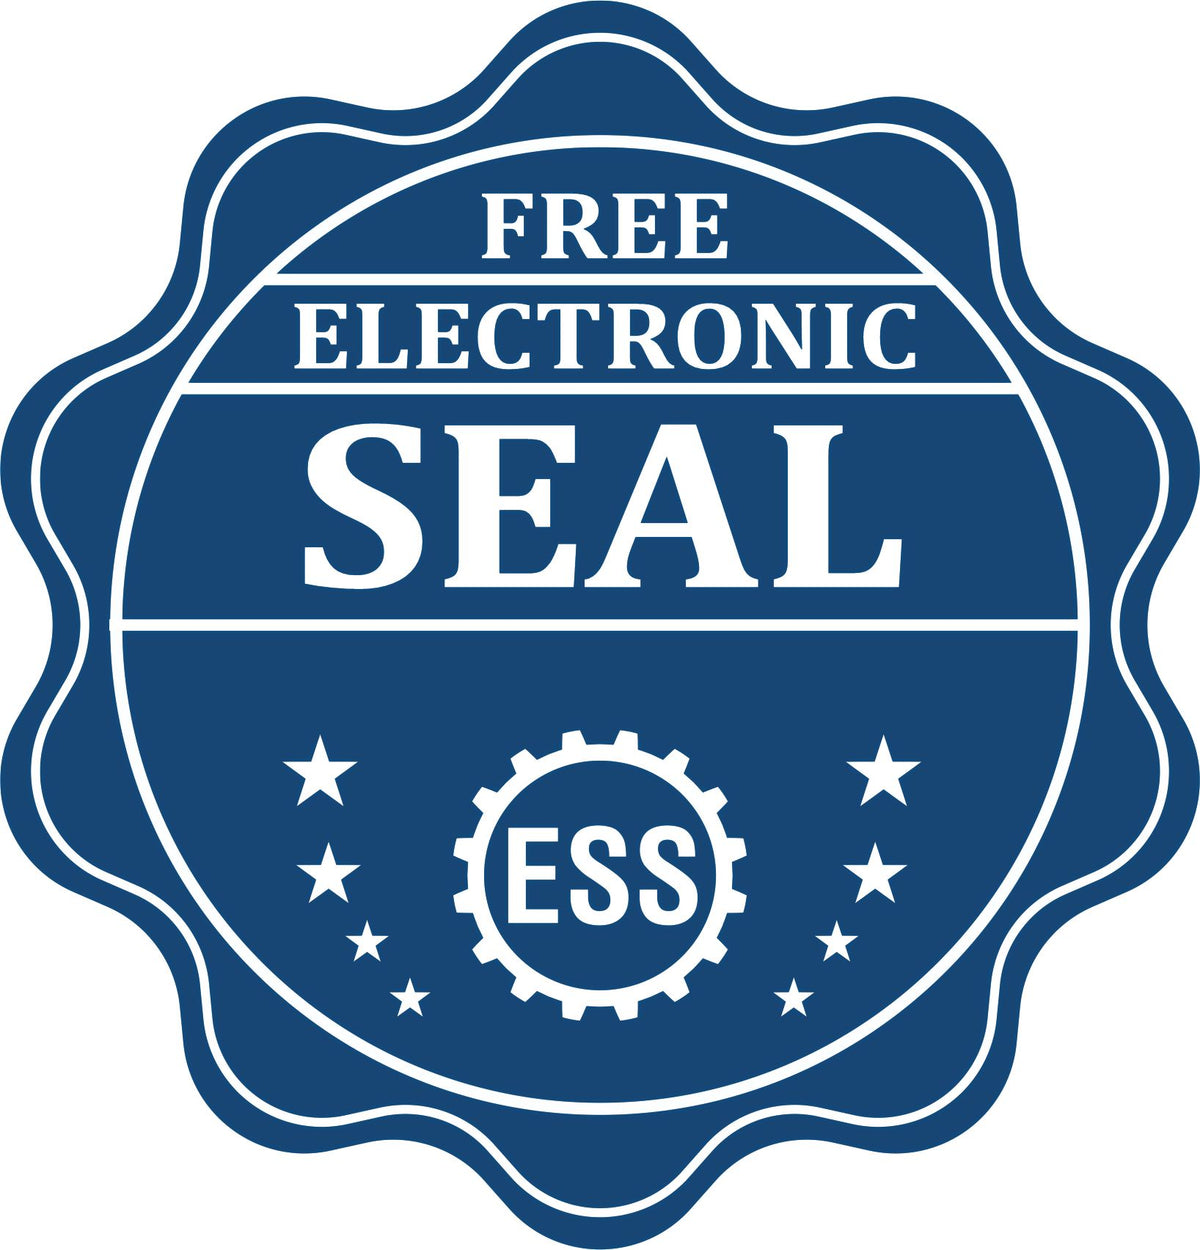 A badge showing a free electronic seal for the State of Hawaii Long Reach Architectural Embossing Seal with stars and the ESS gear on the emblem.